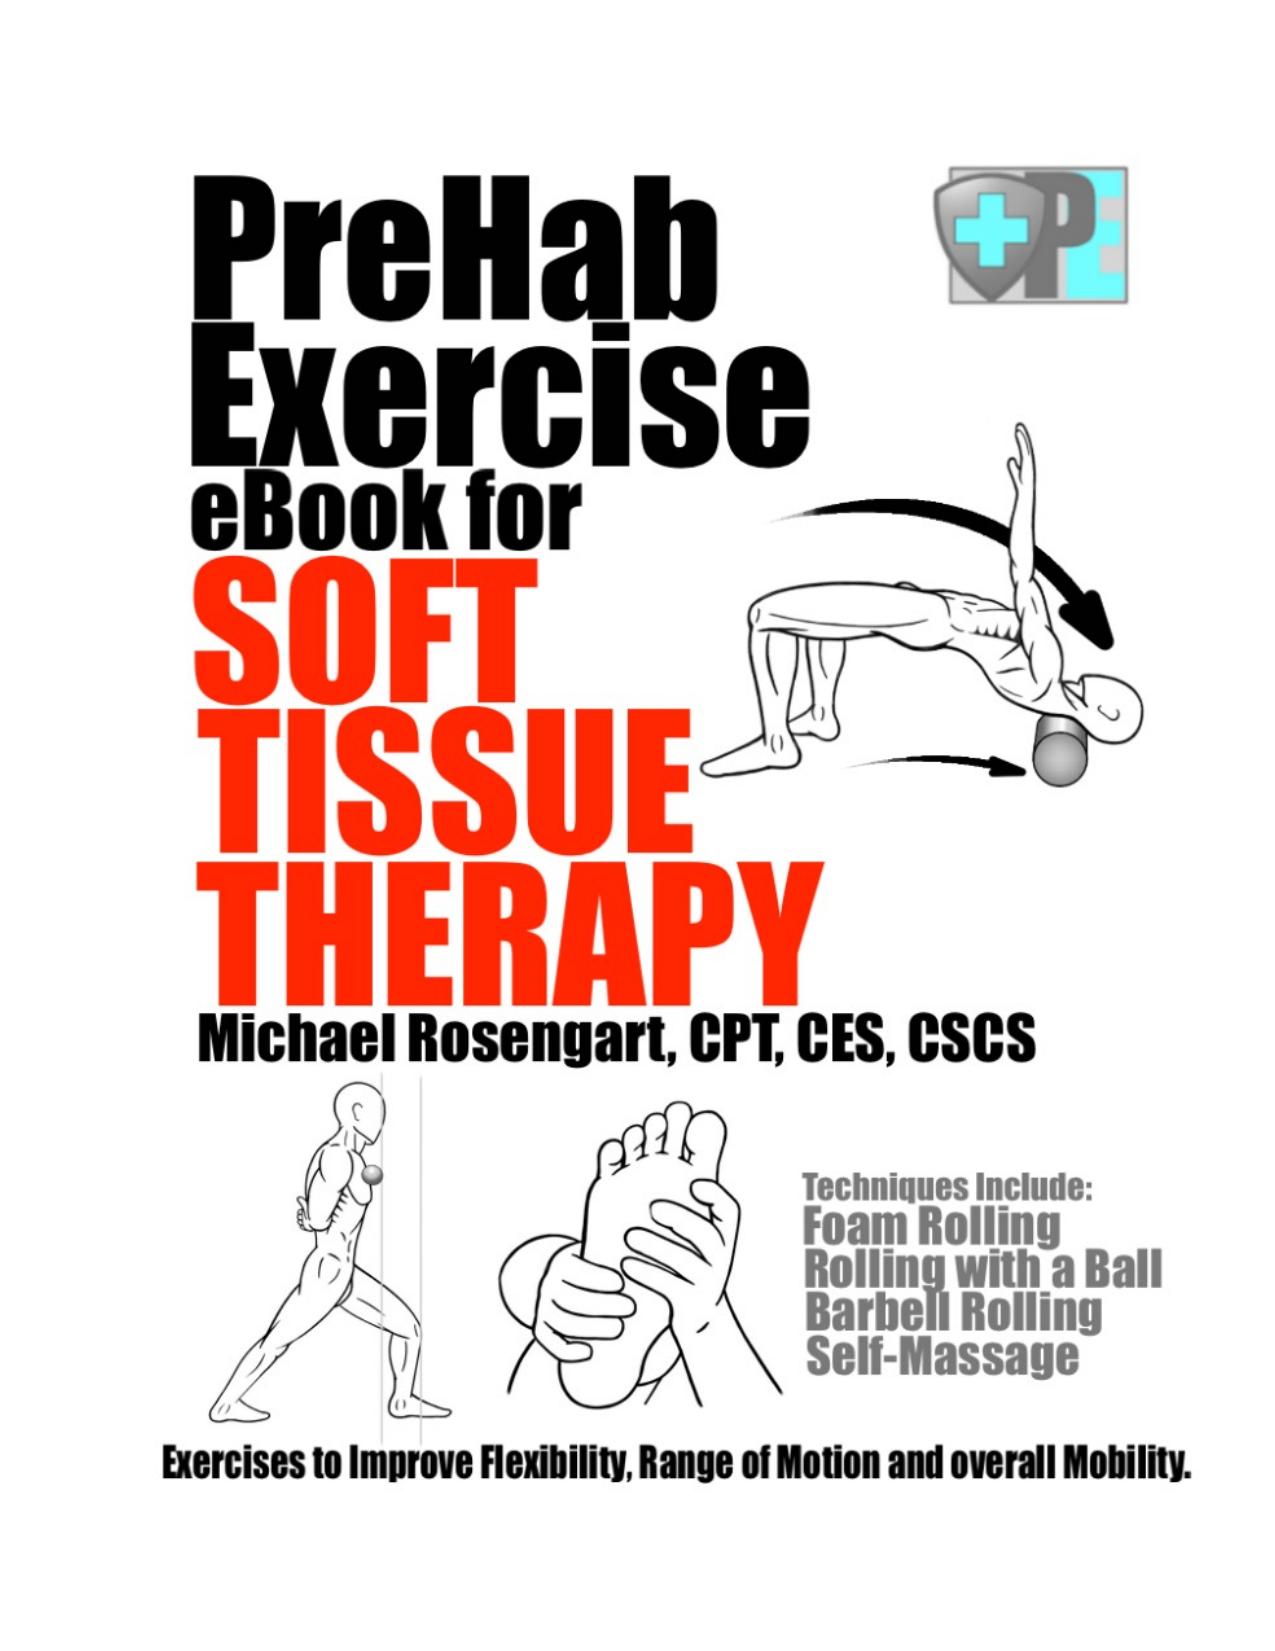 PreHab Exercise Book for Soft Tissue Therapy Exercises to Improve Flexibility, Range of Motion and overall Mobility 2016